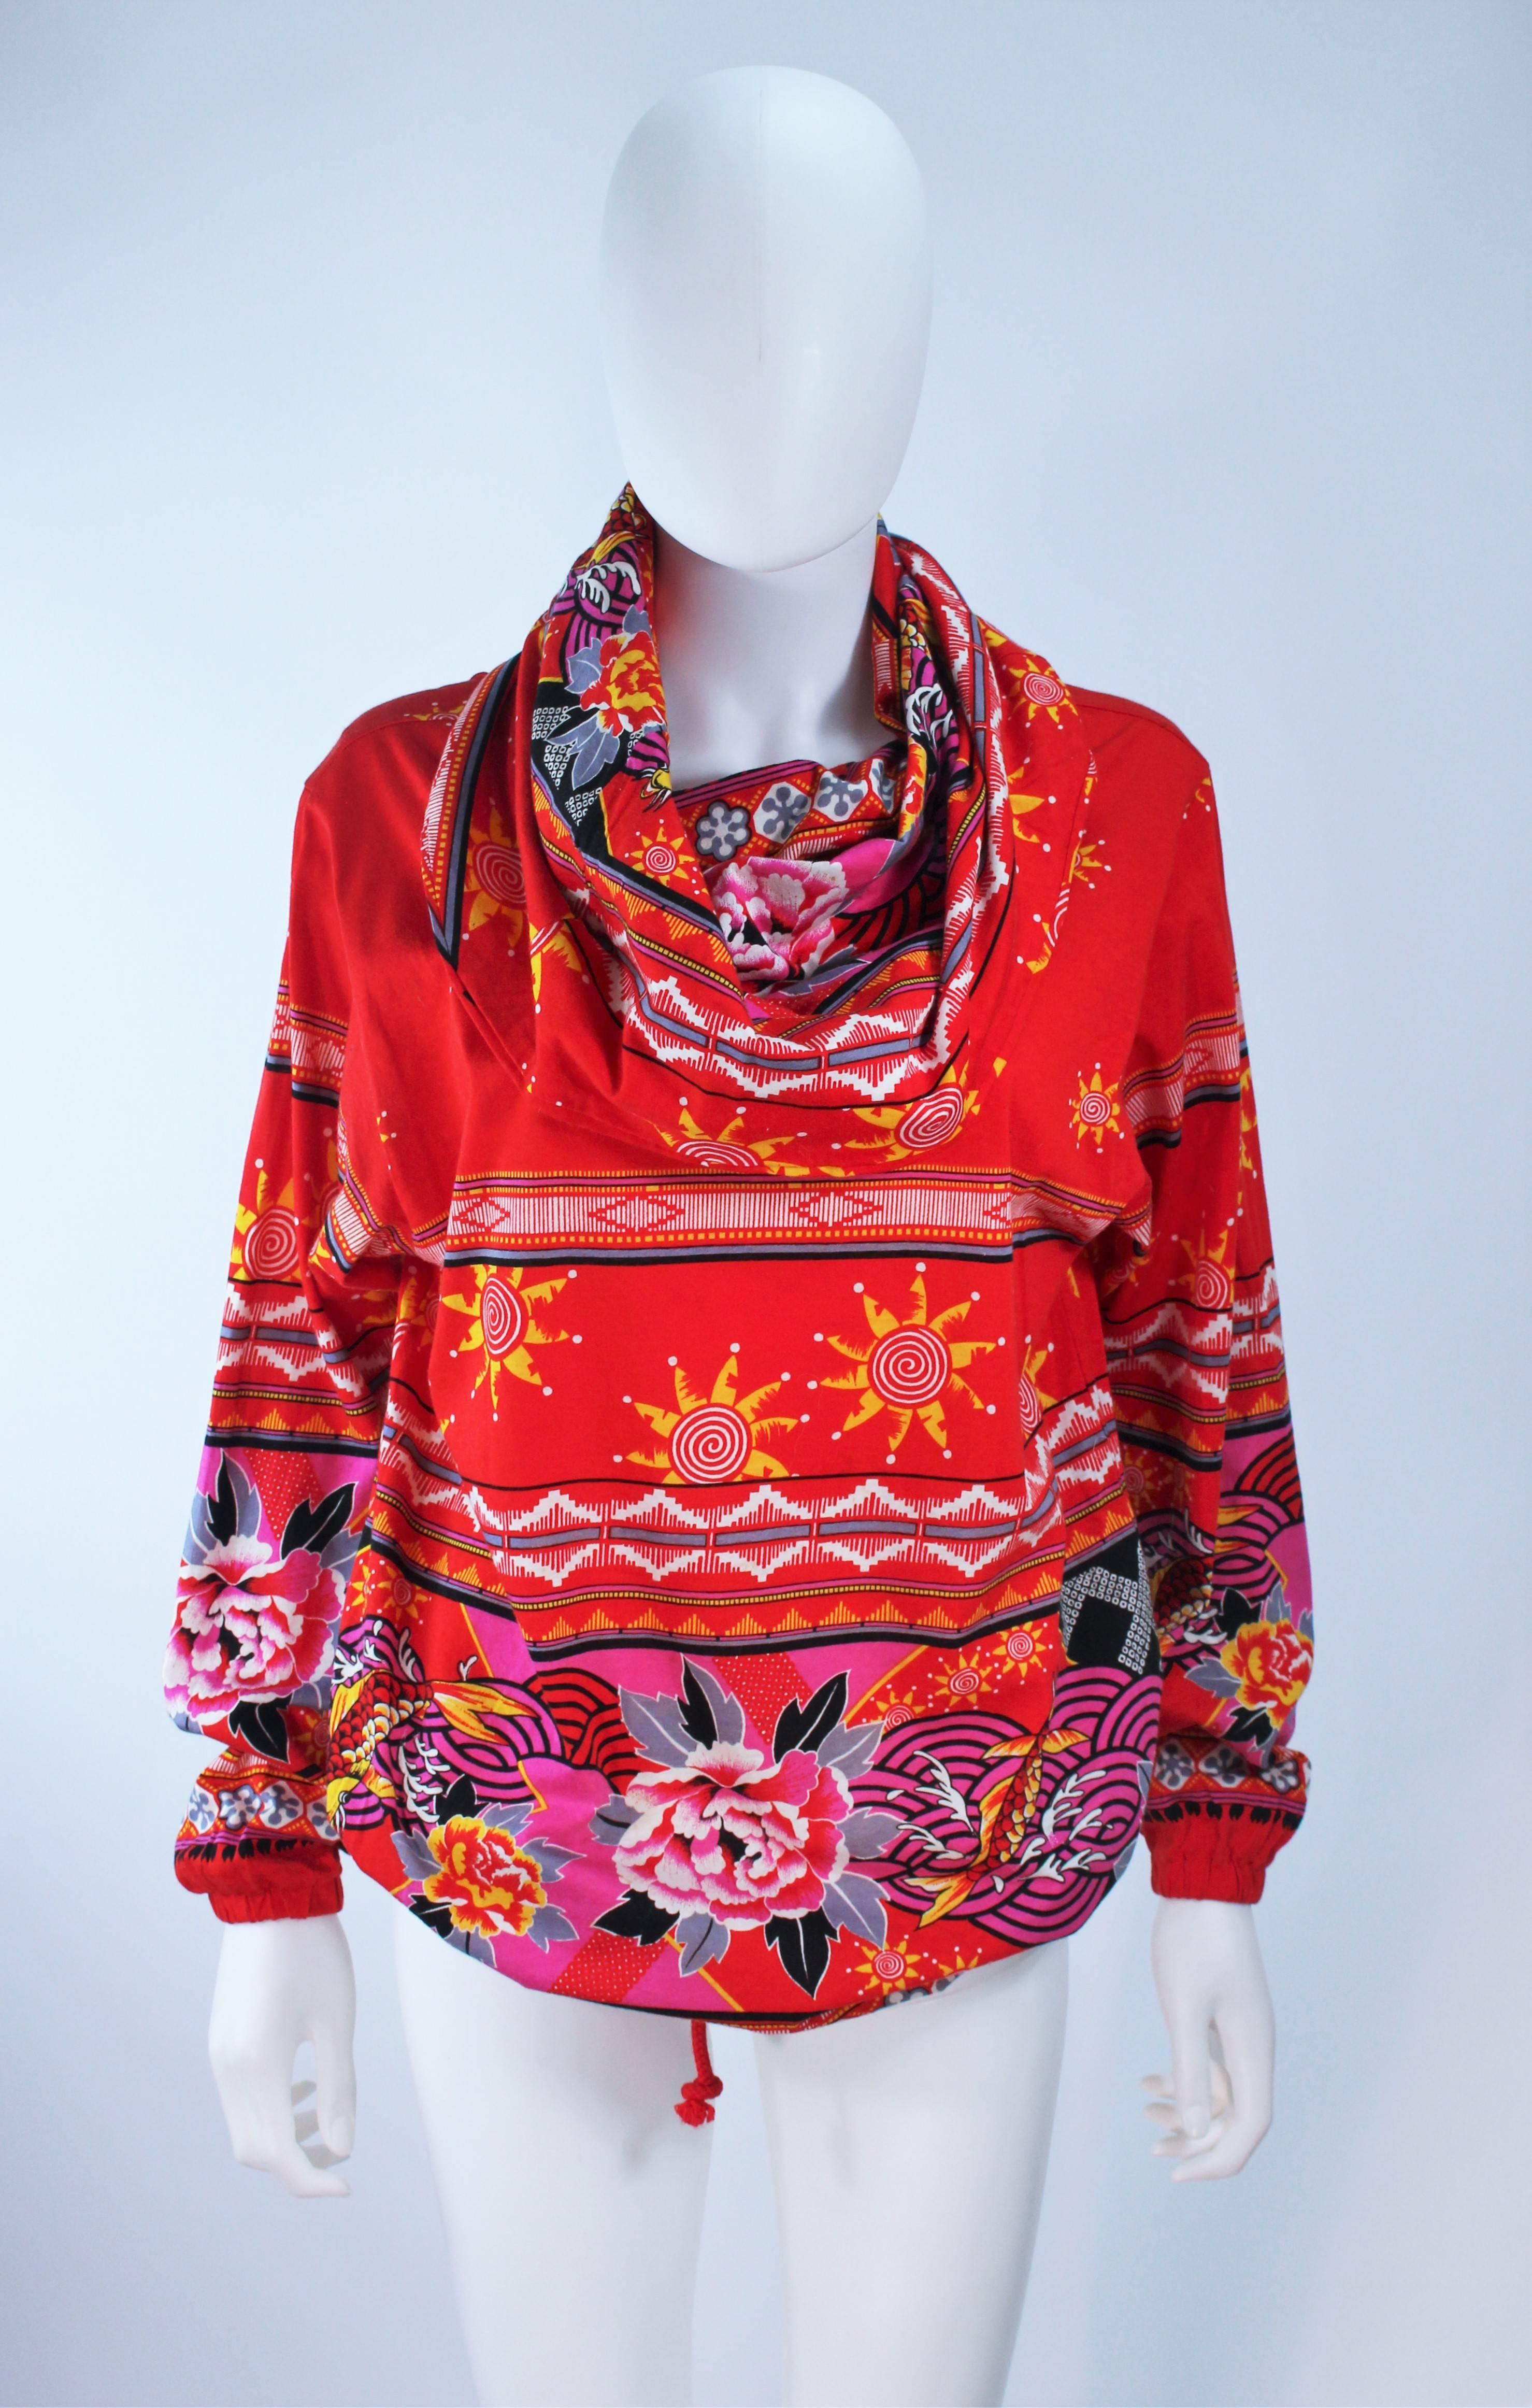 This Kansai Japan  top is composed of red printed knit with a floral and solar design. Features a pull on style with a large collar which can be styled as a hood. There is a waist tie. Made in Japan. In excellent unused condition.

  **Please